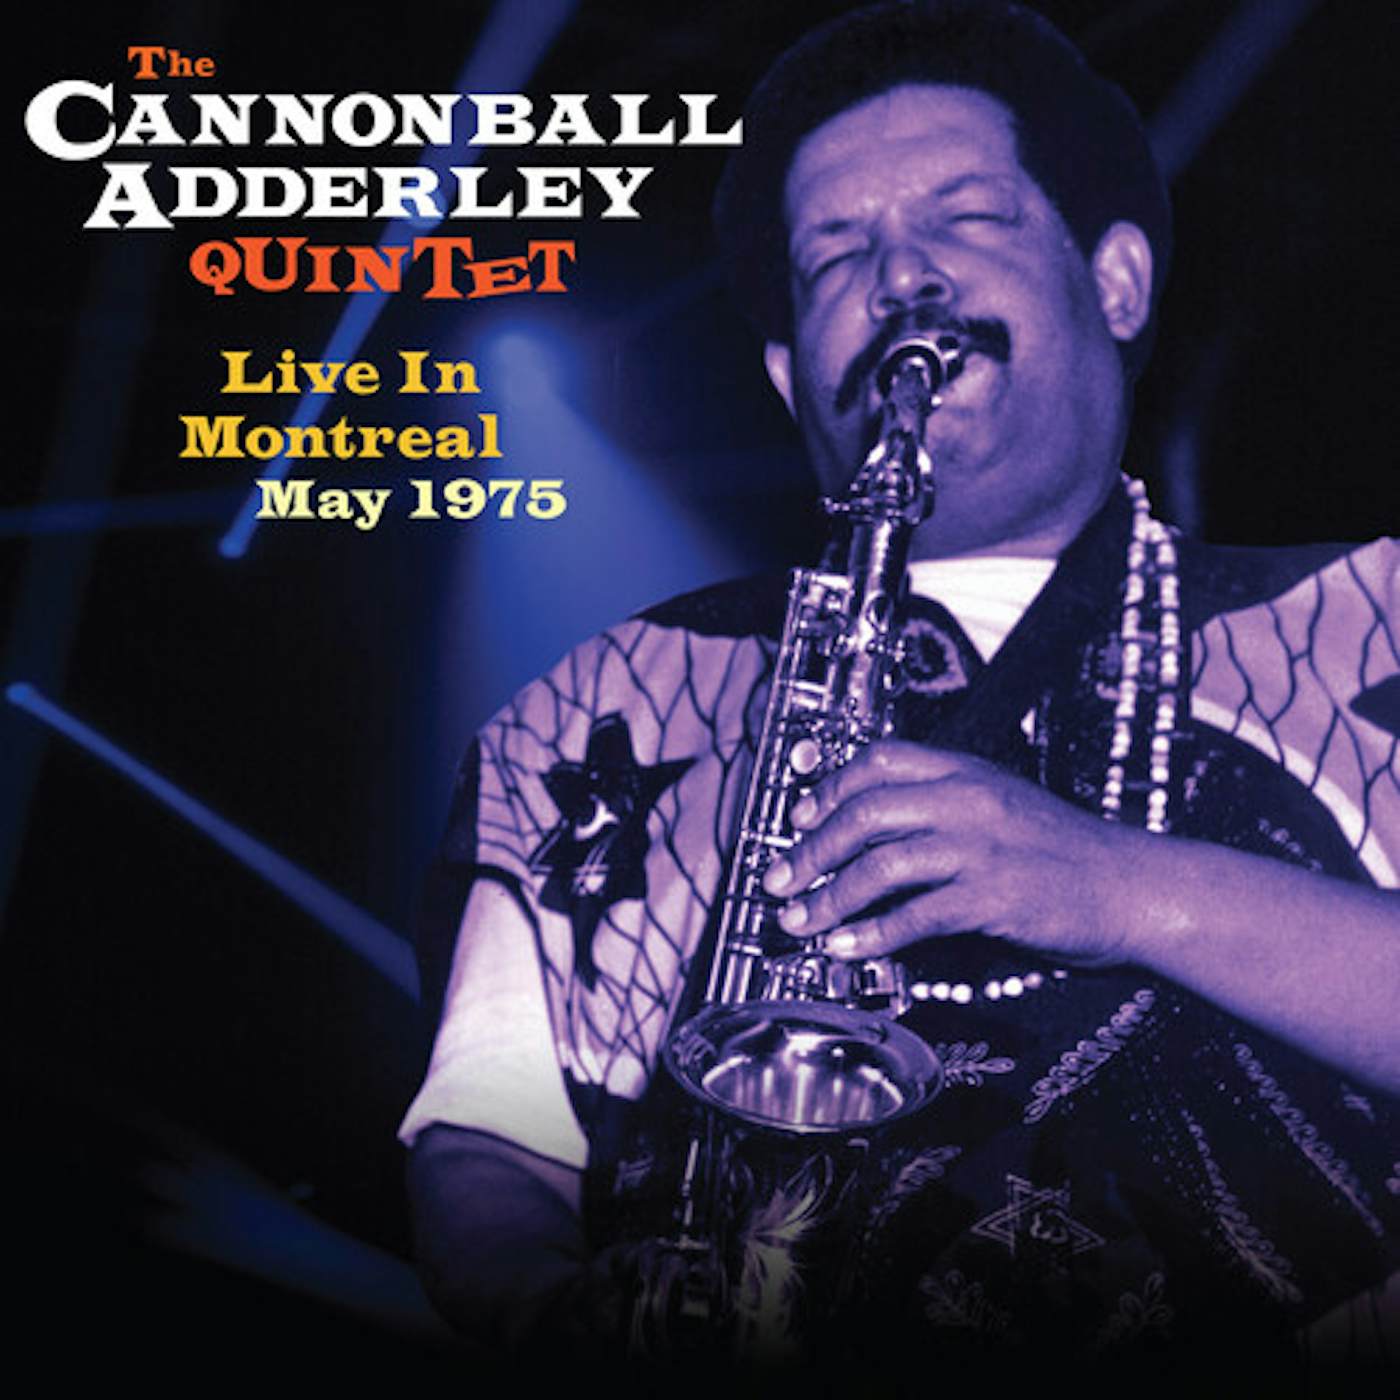 Cannonball Adderley Live In Montreal May 1975 (180g) Vinyl Record